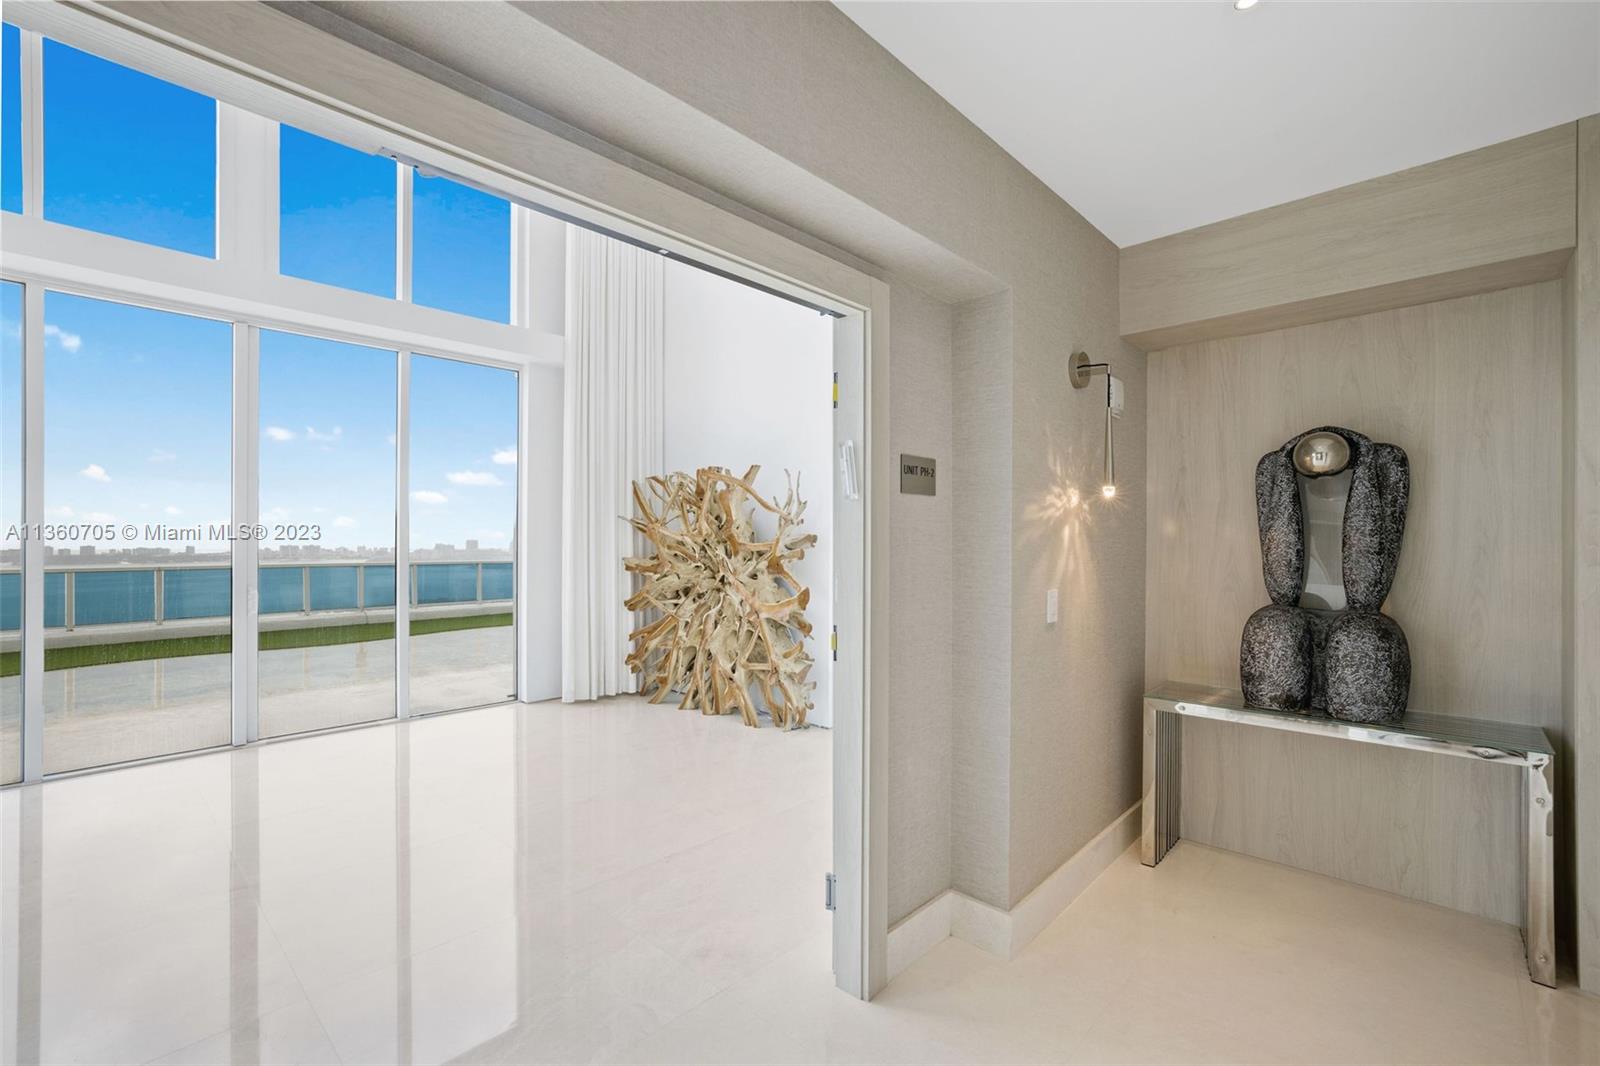 This standout 2-story Penthouse is like living in a single family home with the convenience of condo lifestyle. Enjoy the expansive 4,500 sqft terrace with sky sweeping views of sunrise over Biscayne Bay to sunsets of the West, complimented with 6,291 sqft of interior space. Master suite alone is one like you’ve never seen, with jaw dropping floor to ceiling windows and runway like master closet. With detail oriented finishes and luxurious appliances, the minimalistic neutral feel is suitable for the most eccentric buyer. At home theater is an addition to your 3 bedrooms to mix and match your living corridors. Located in the booming neighborhood of Edgewater, you’re minutes away from Brickell, Wynwood, Miami Beach, FTX Arena, and Miami Intl Airport